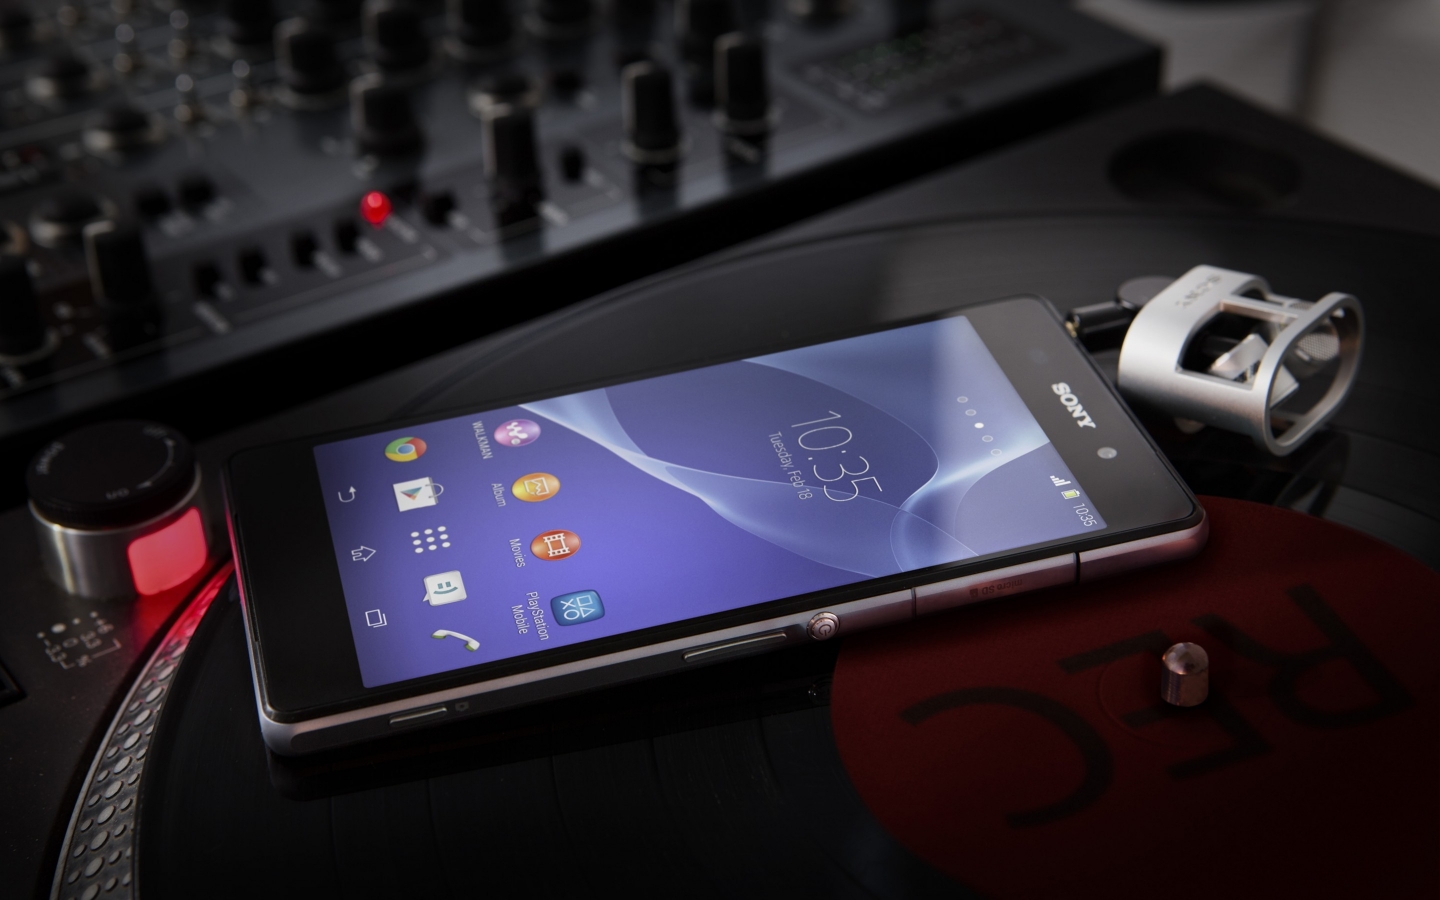 Sony Xperia Z2 for 1440 x 900 widescreen resolution